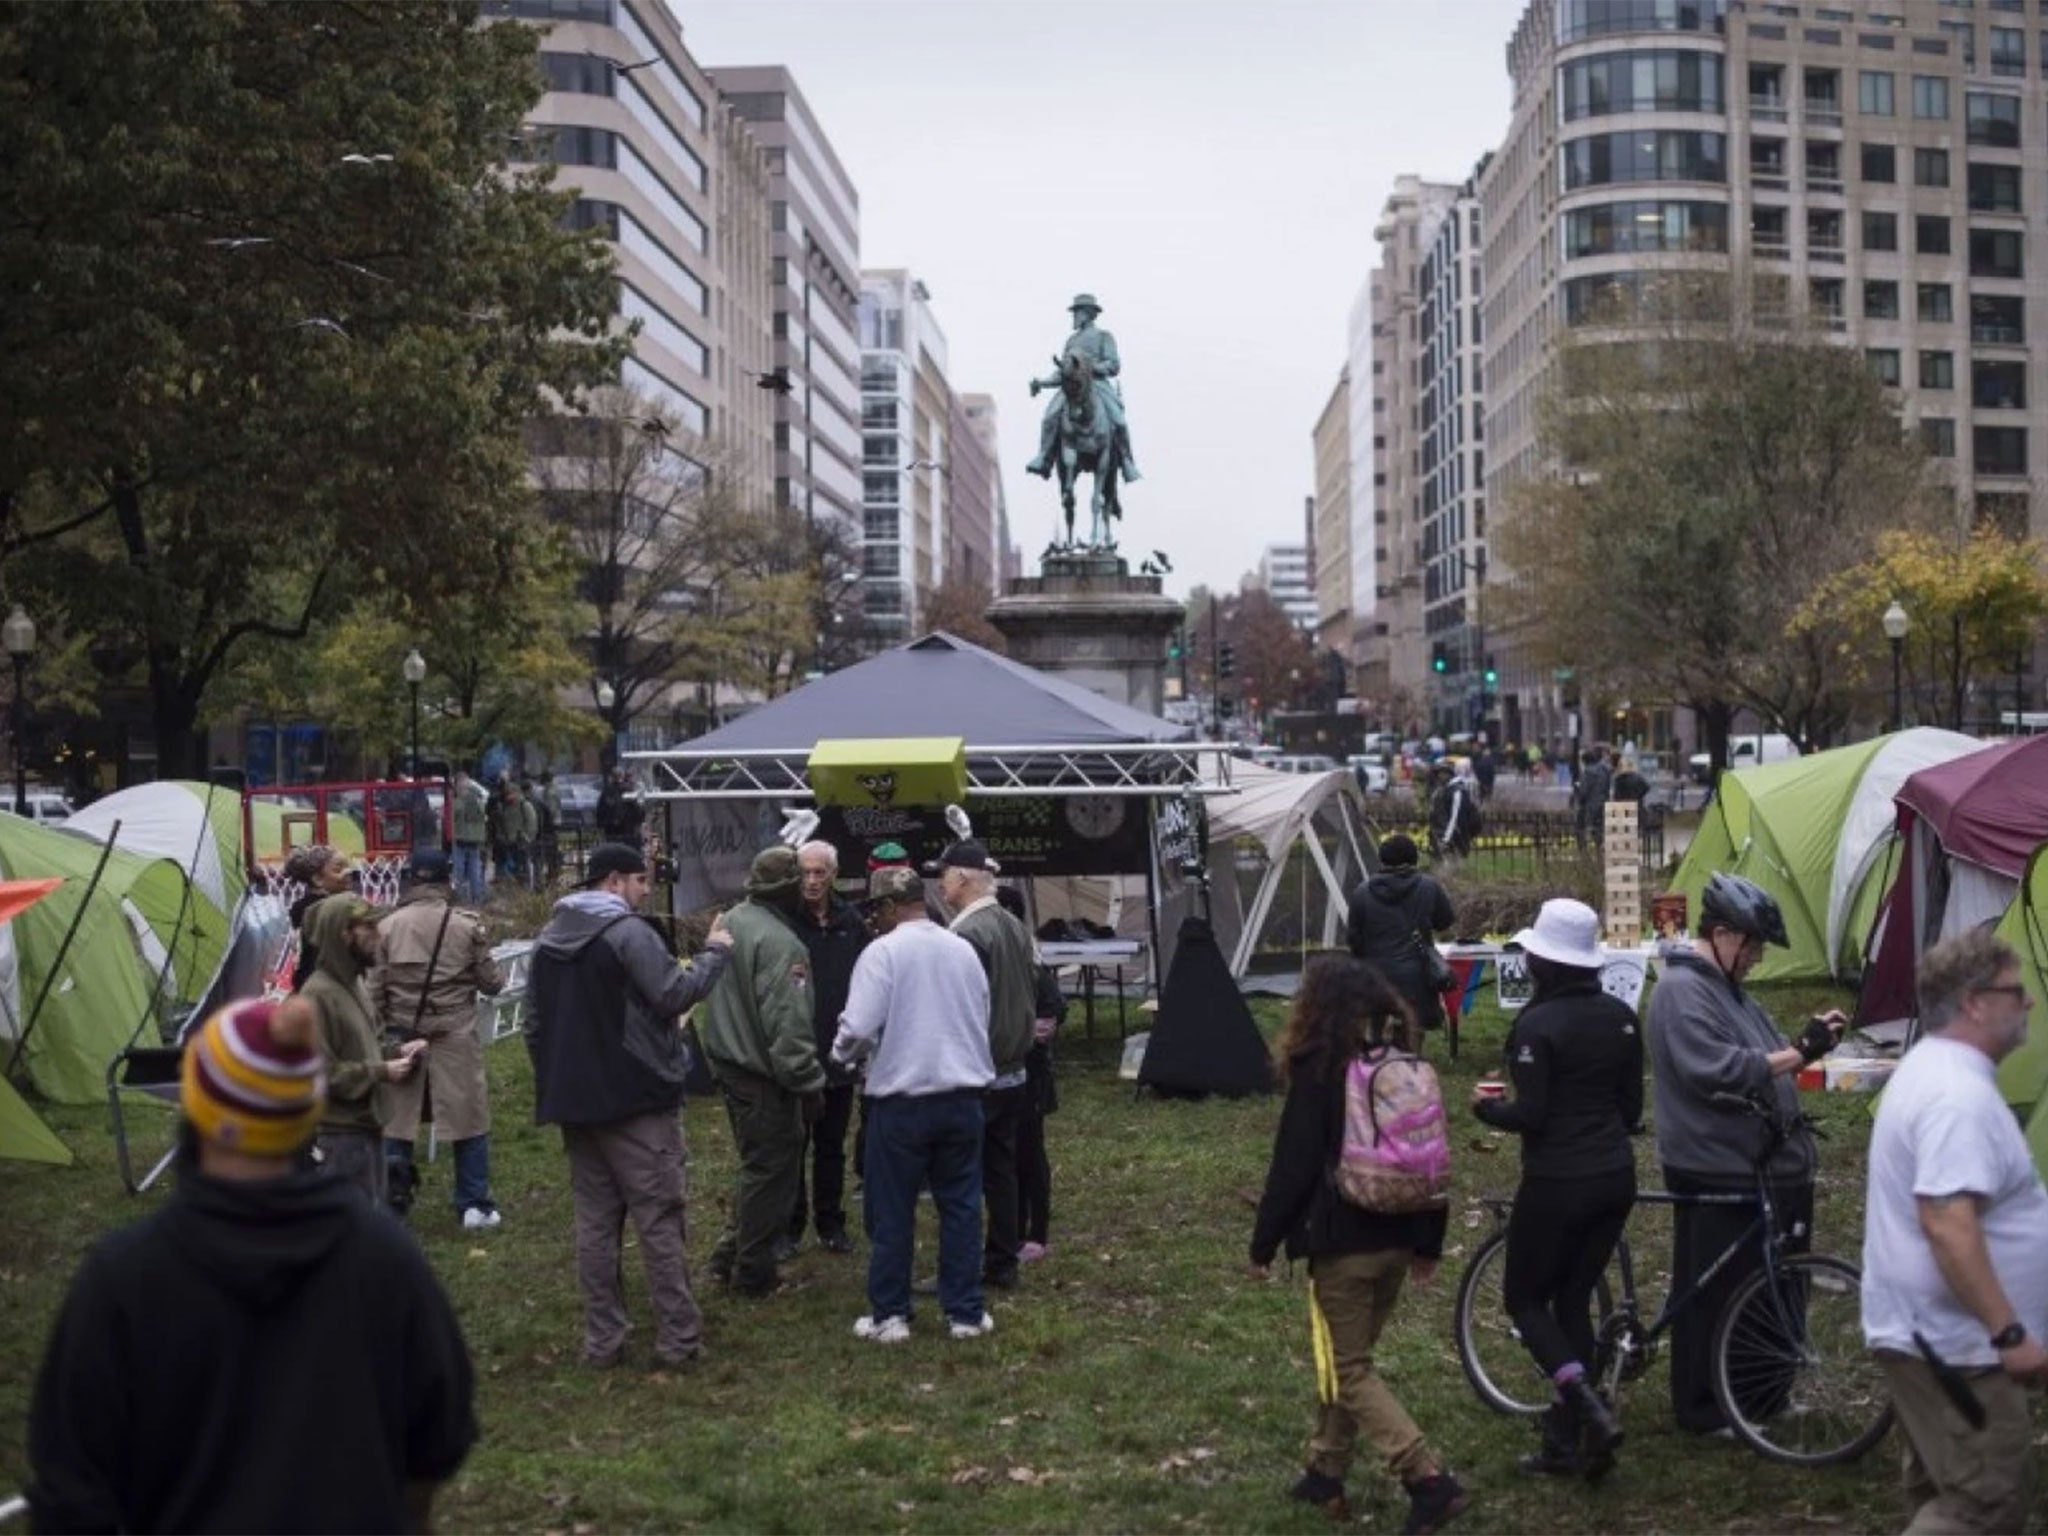 People set up for a Weed For Warriors Project event on Tuesday at McPherson Square in Washington